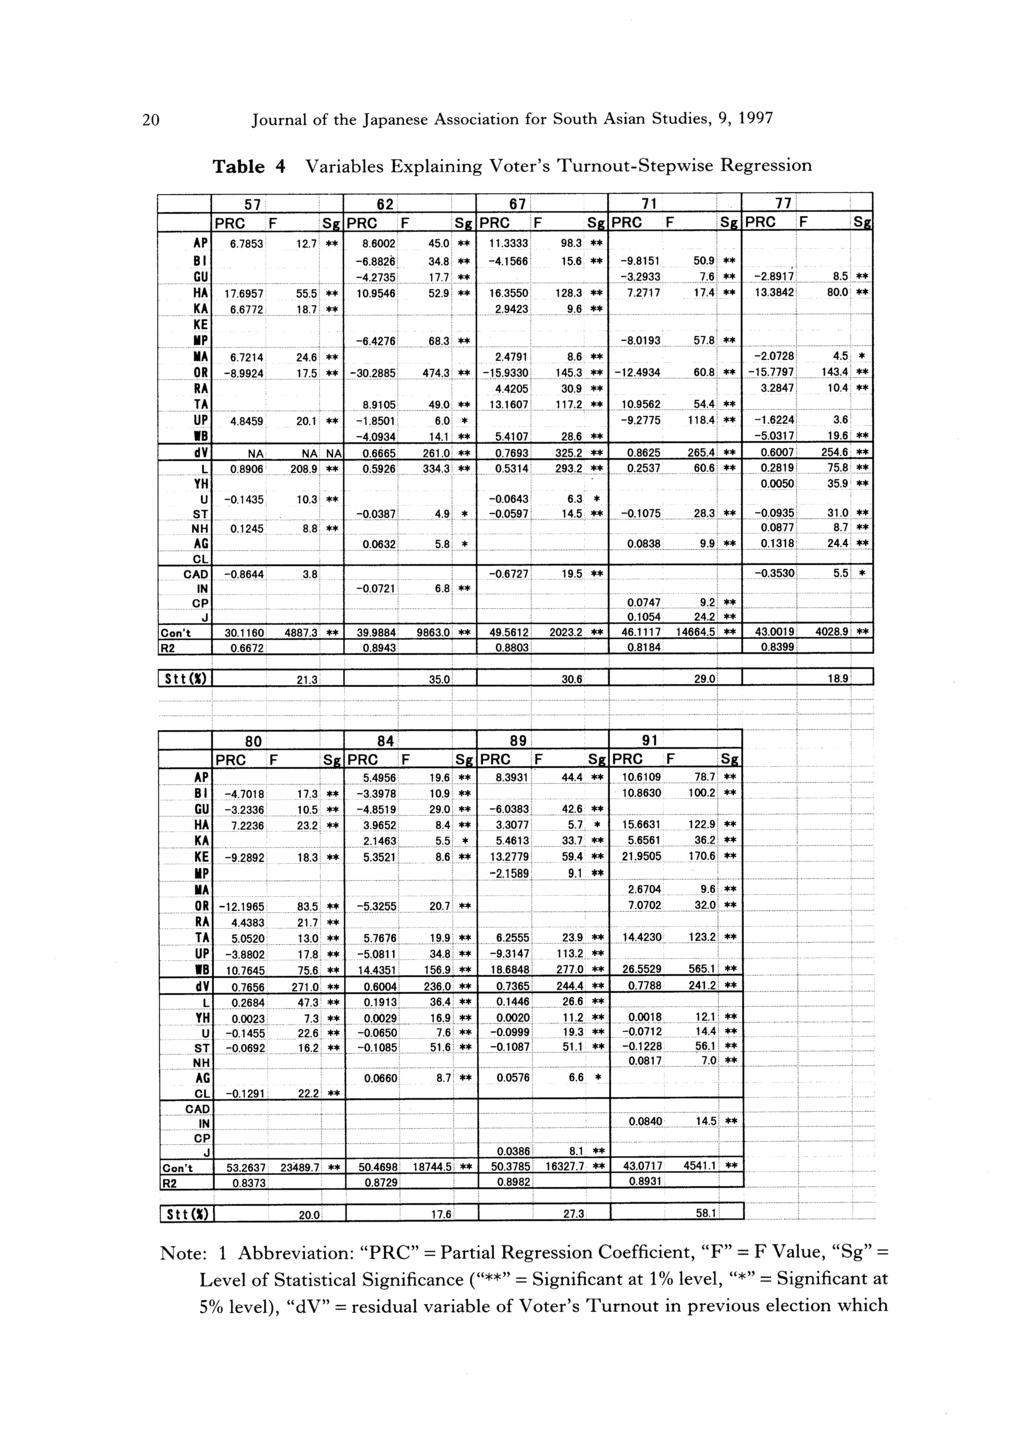 20 Journal of the Japanese Association for South Asian Studies, 9, 1997 Table 4 Variables Explaining Voter's Turnout-Stepwise Regression Note: 1 Abbreviation: "PRC" = Partial Regression